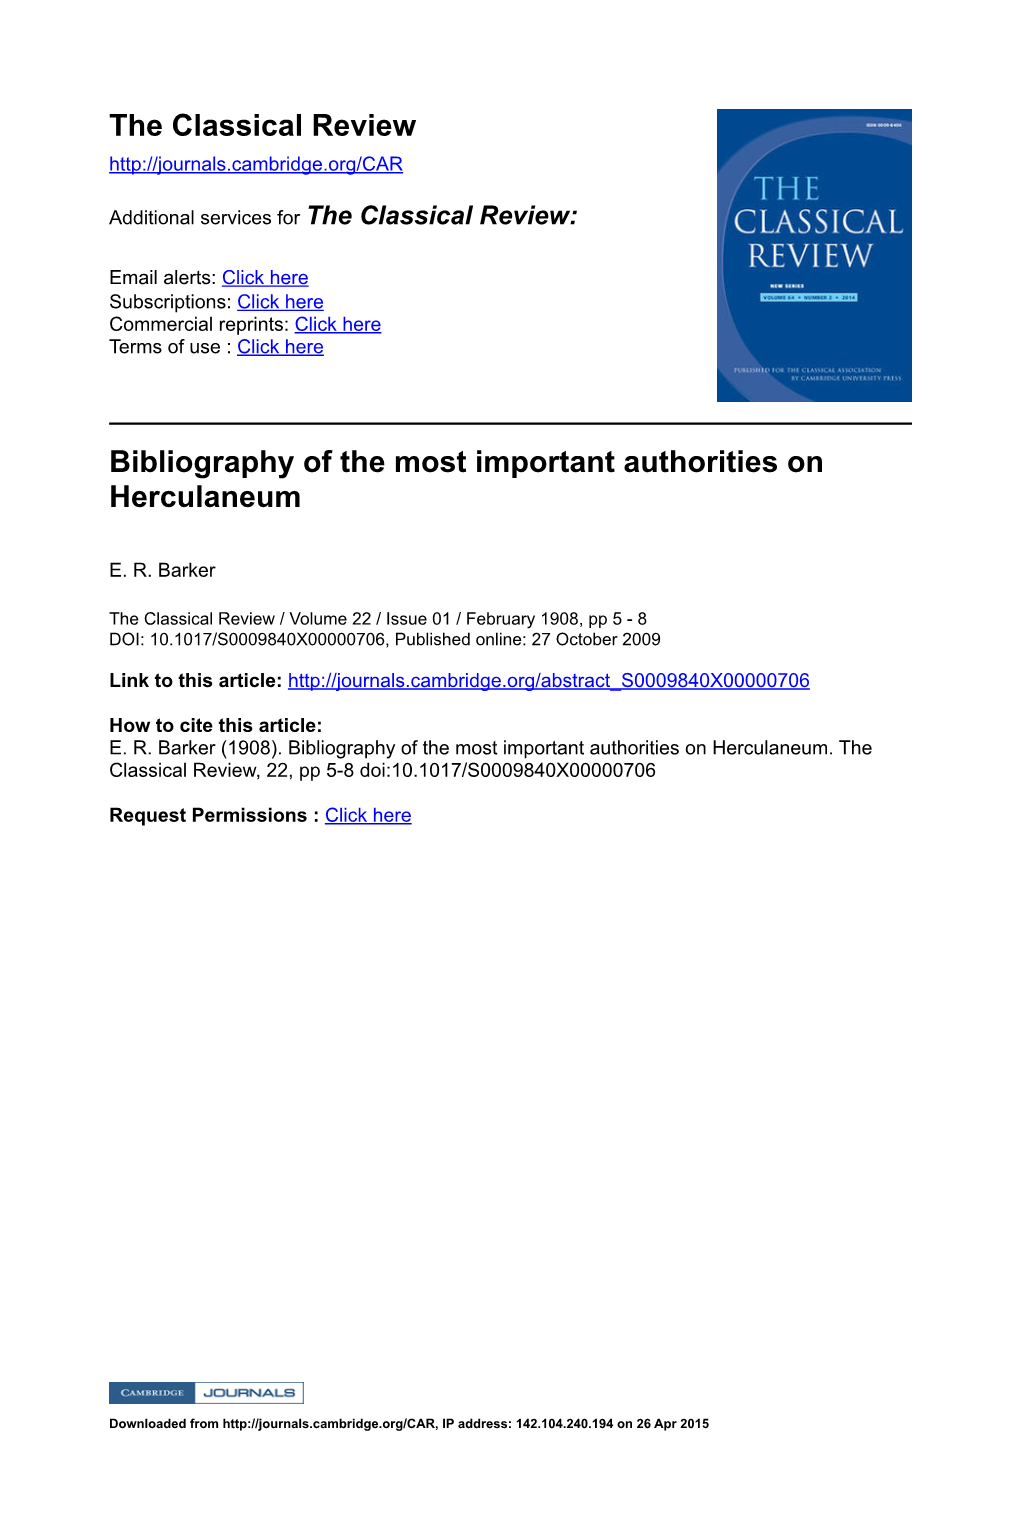 Bibliography of the Most Important Authorities on Herculaneum